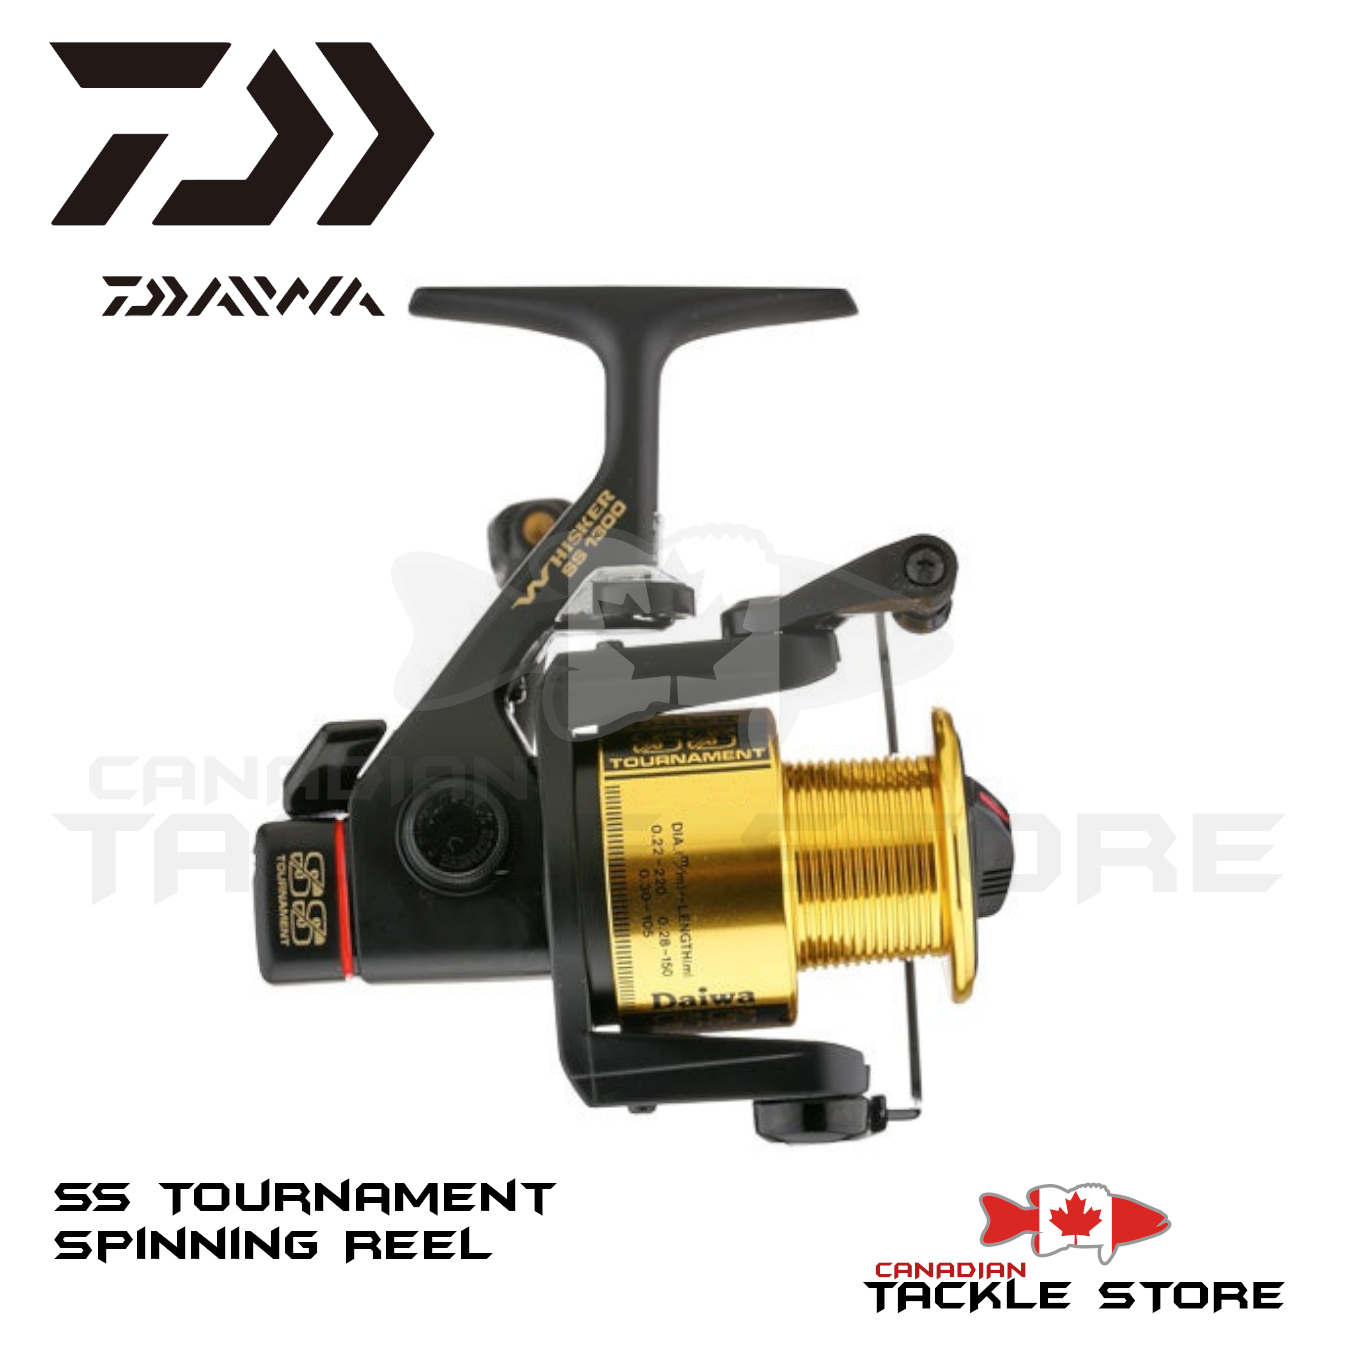 Daiwa Tournament SS Spinning Reel – Canadian Tackle Store